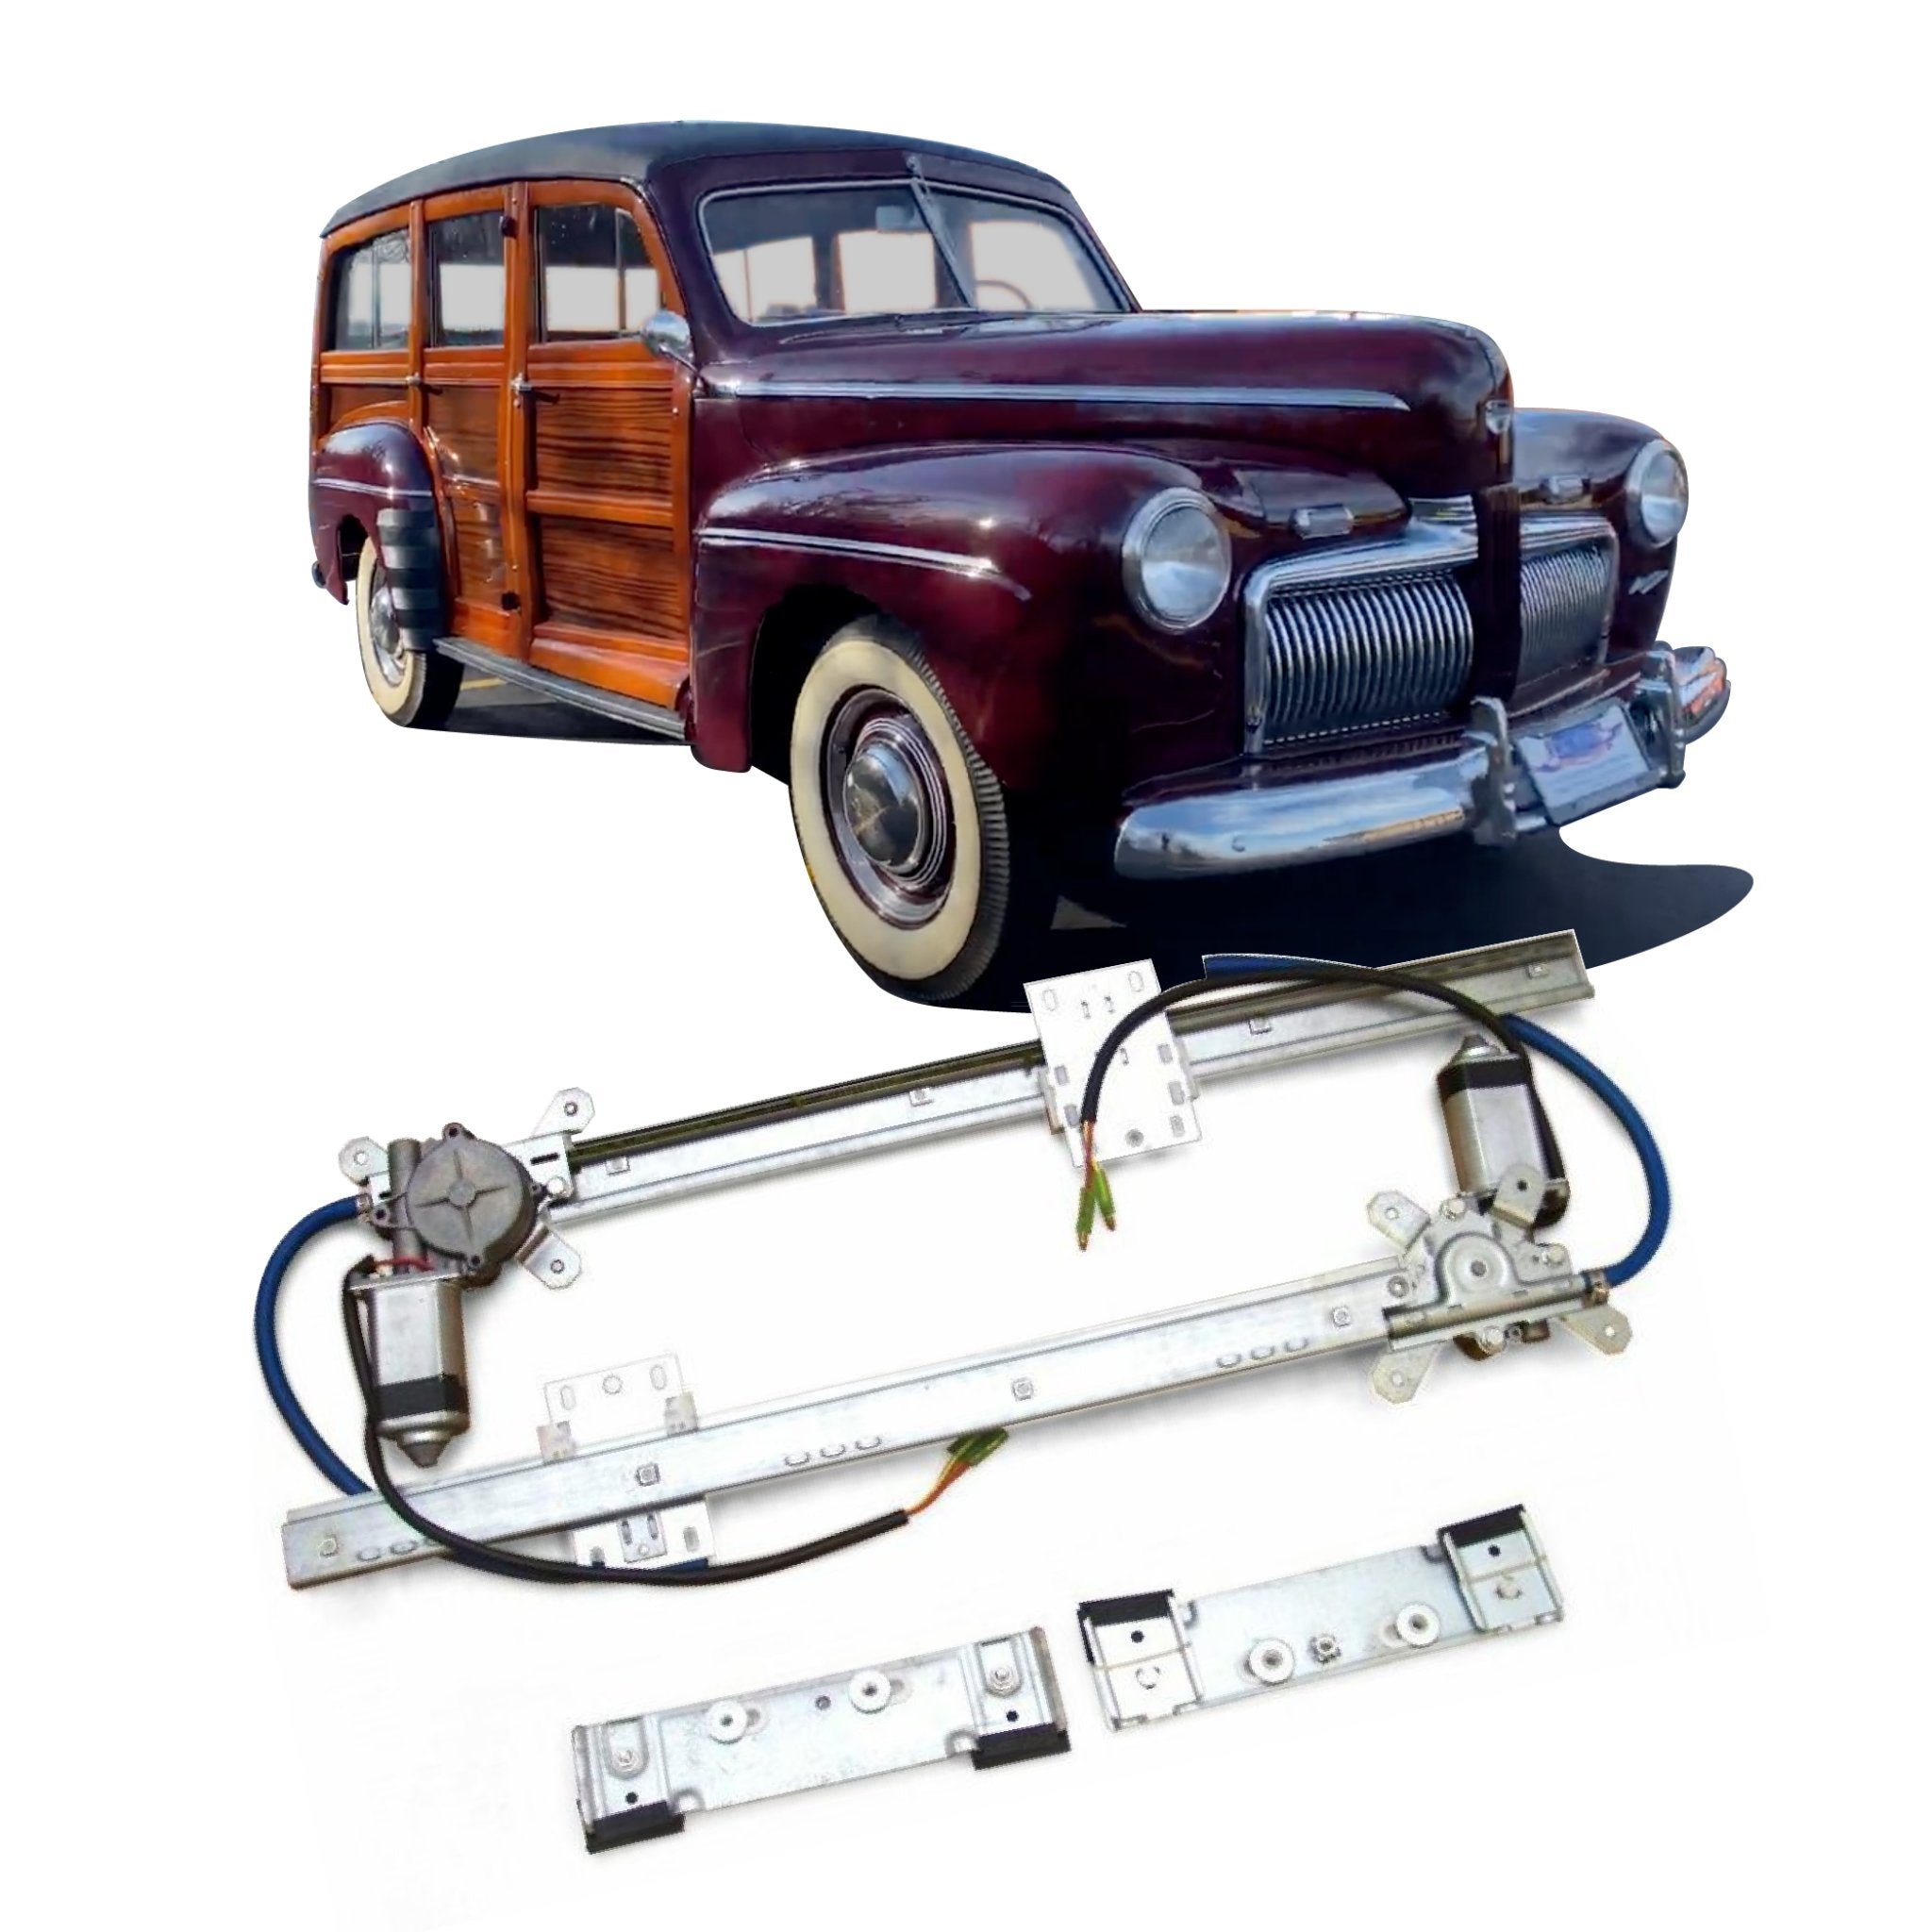 12V Power Window Kit for 1942 Ford Station Wagon Standard Deluxe Super Woody